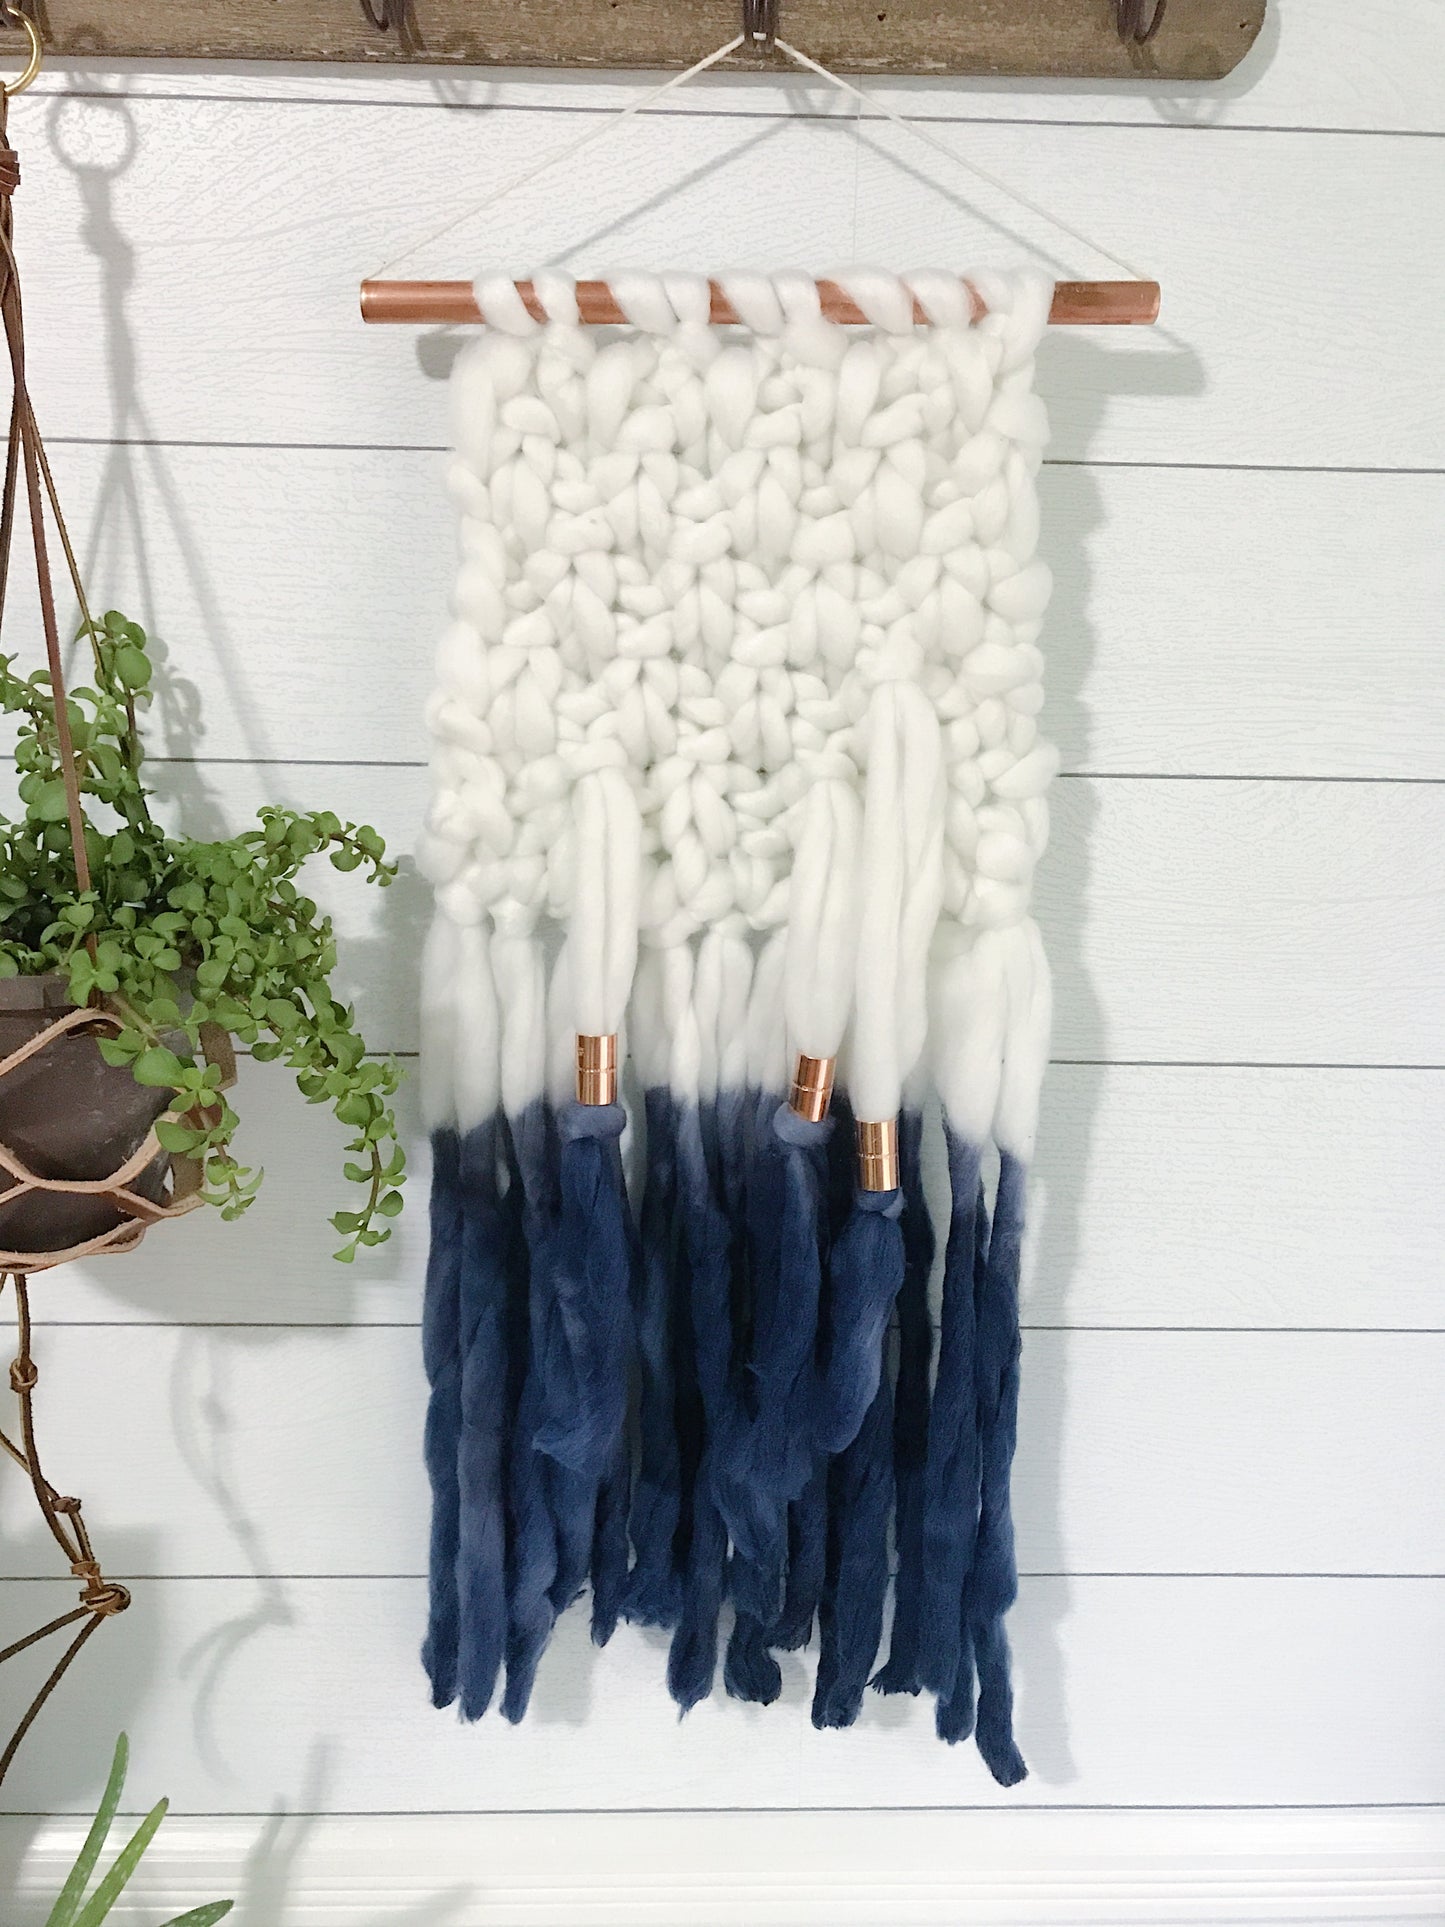 Indigo Blue Dip Dye Ombré Knit Wall Hanging with Copper Detail